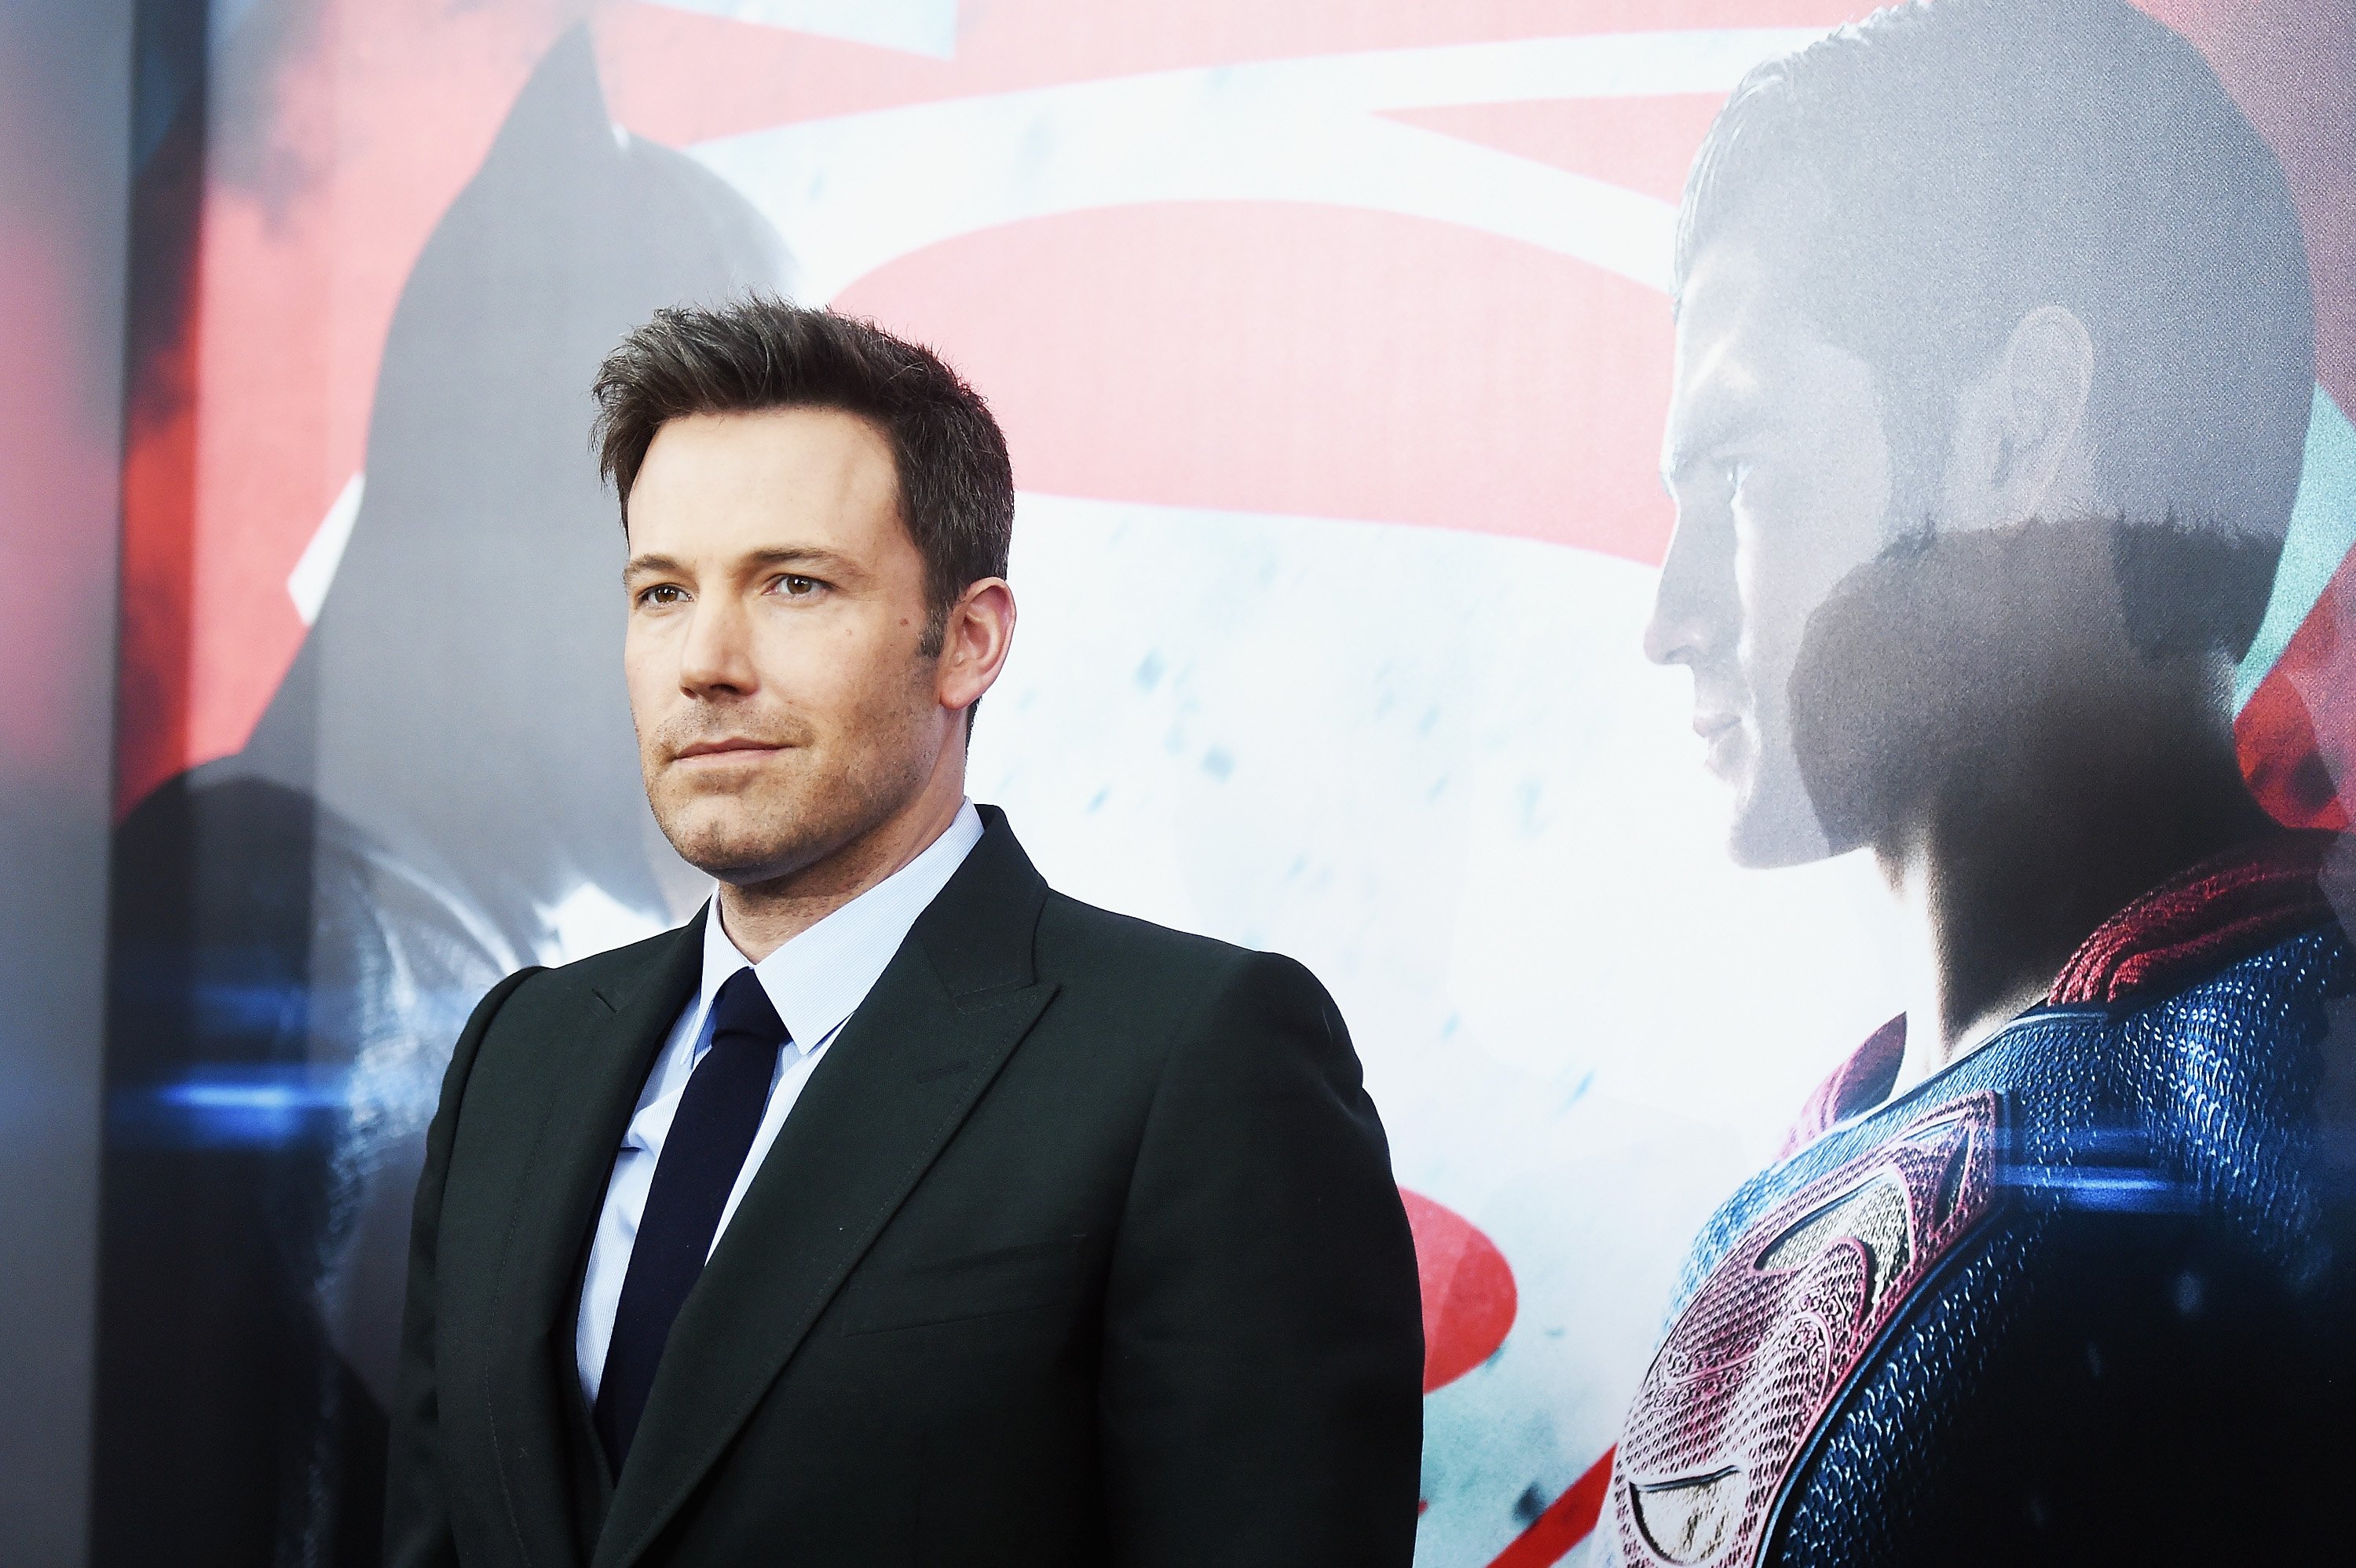 Actor Ben Affleck attends the "Batman V Superman: Dawn Of Justice" New York Premiere at Radio City Music Hall on March 20, 2016 in New York City. (Photo by Jamie McCarthy/Getty Images)